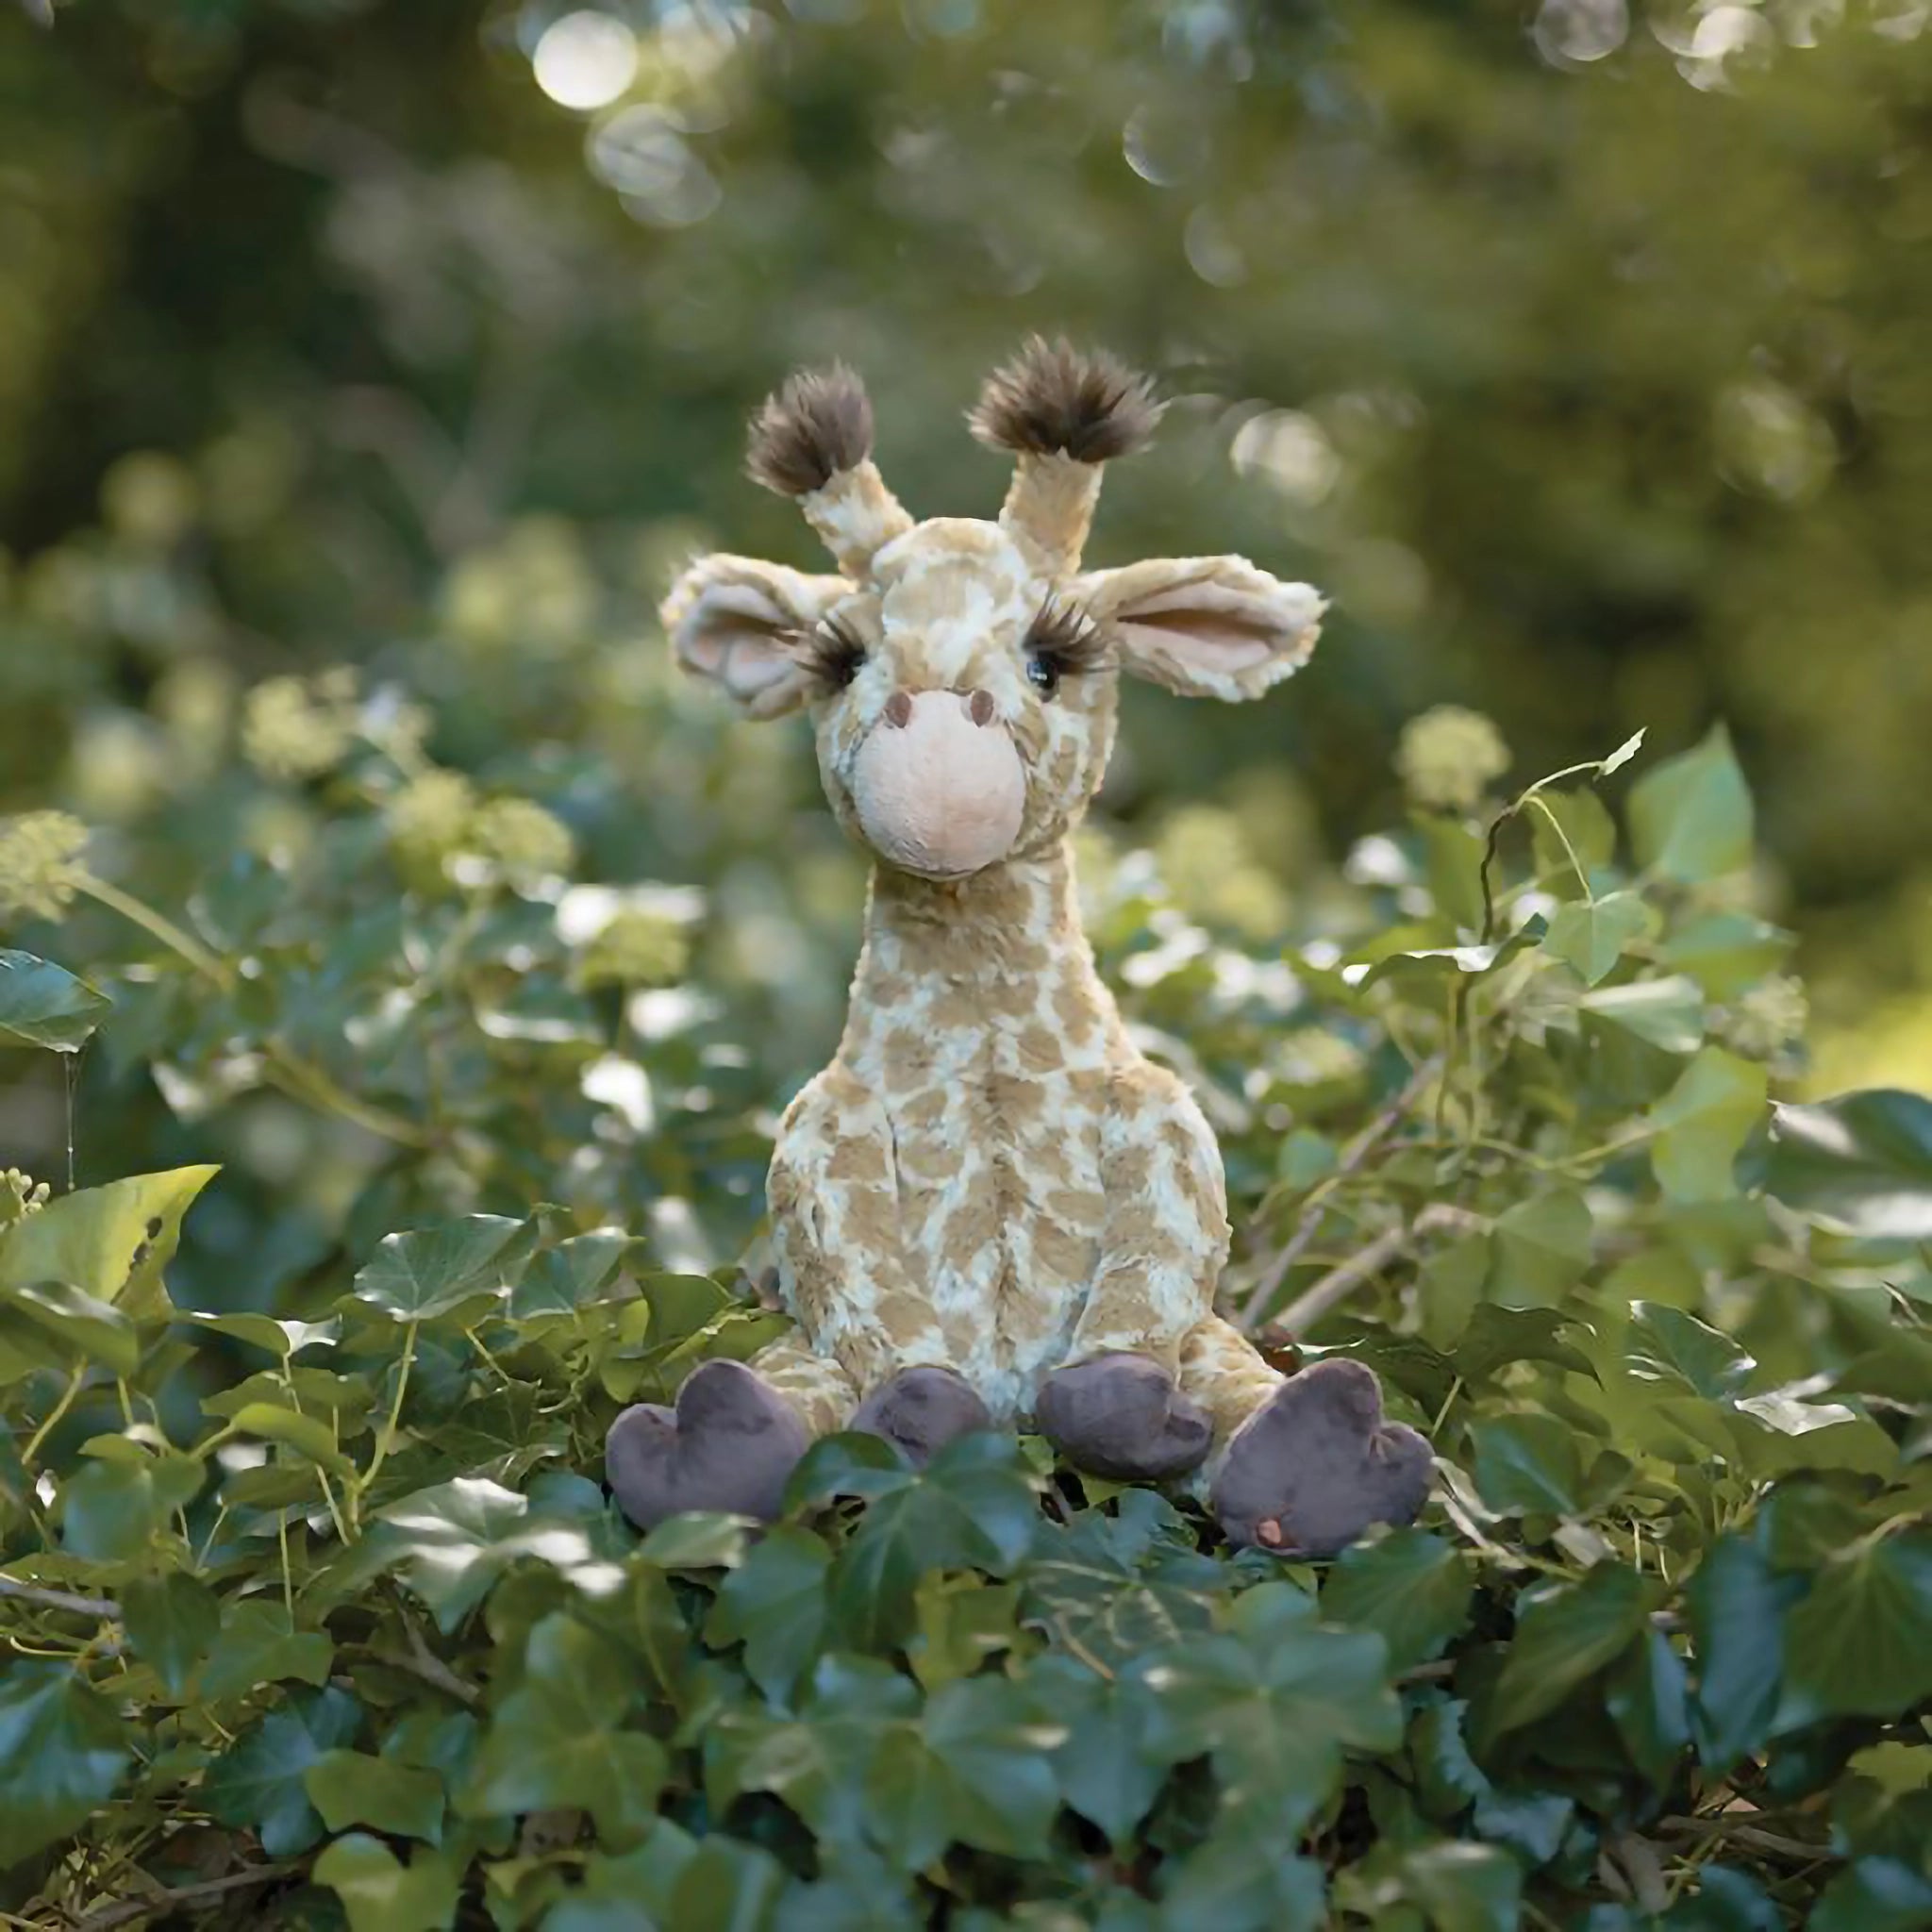 A stuffed giraffe plush toy with the Wrendale logo embroidered on the bottom of its foot posed in ivy